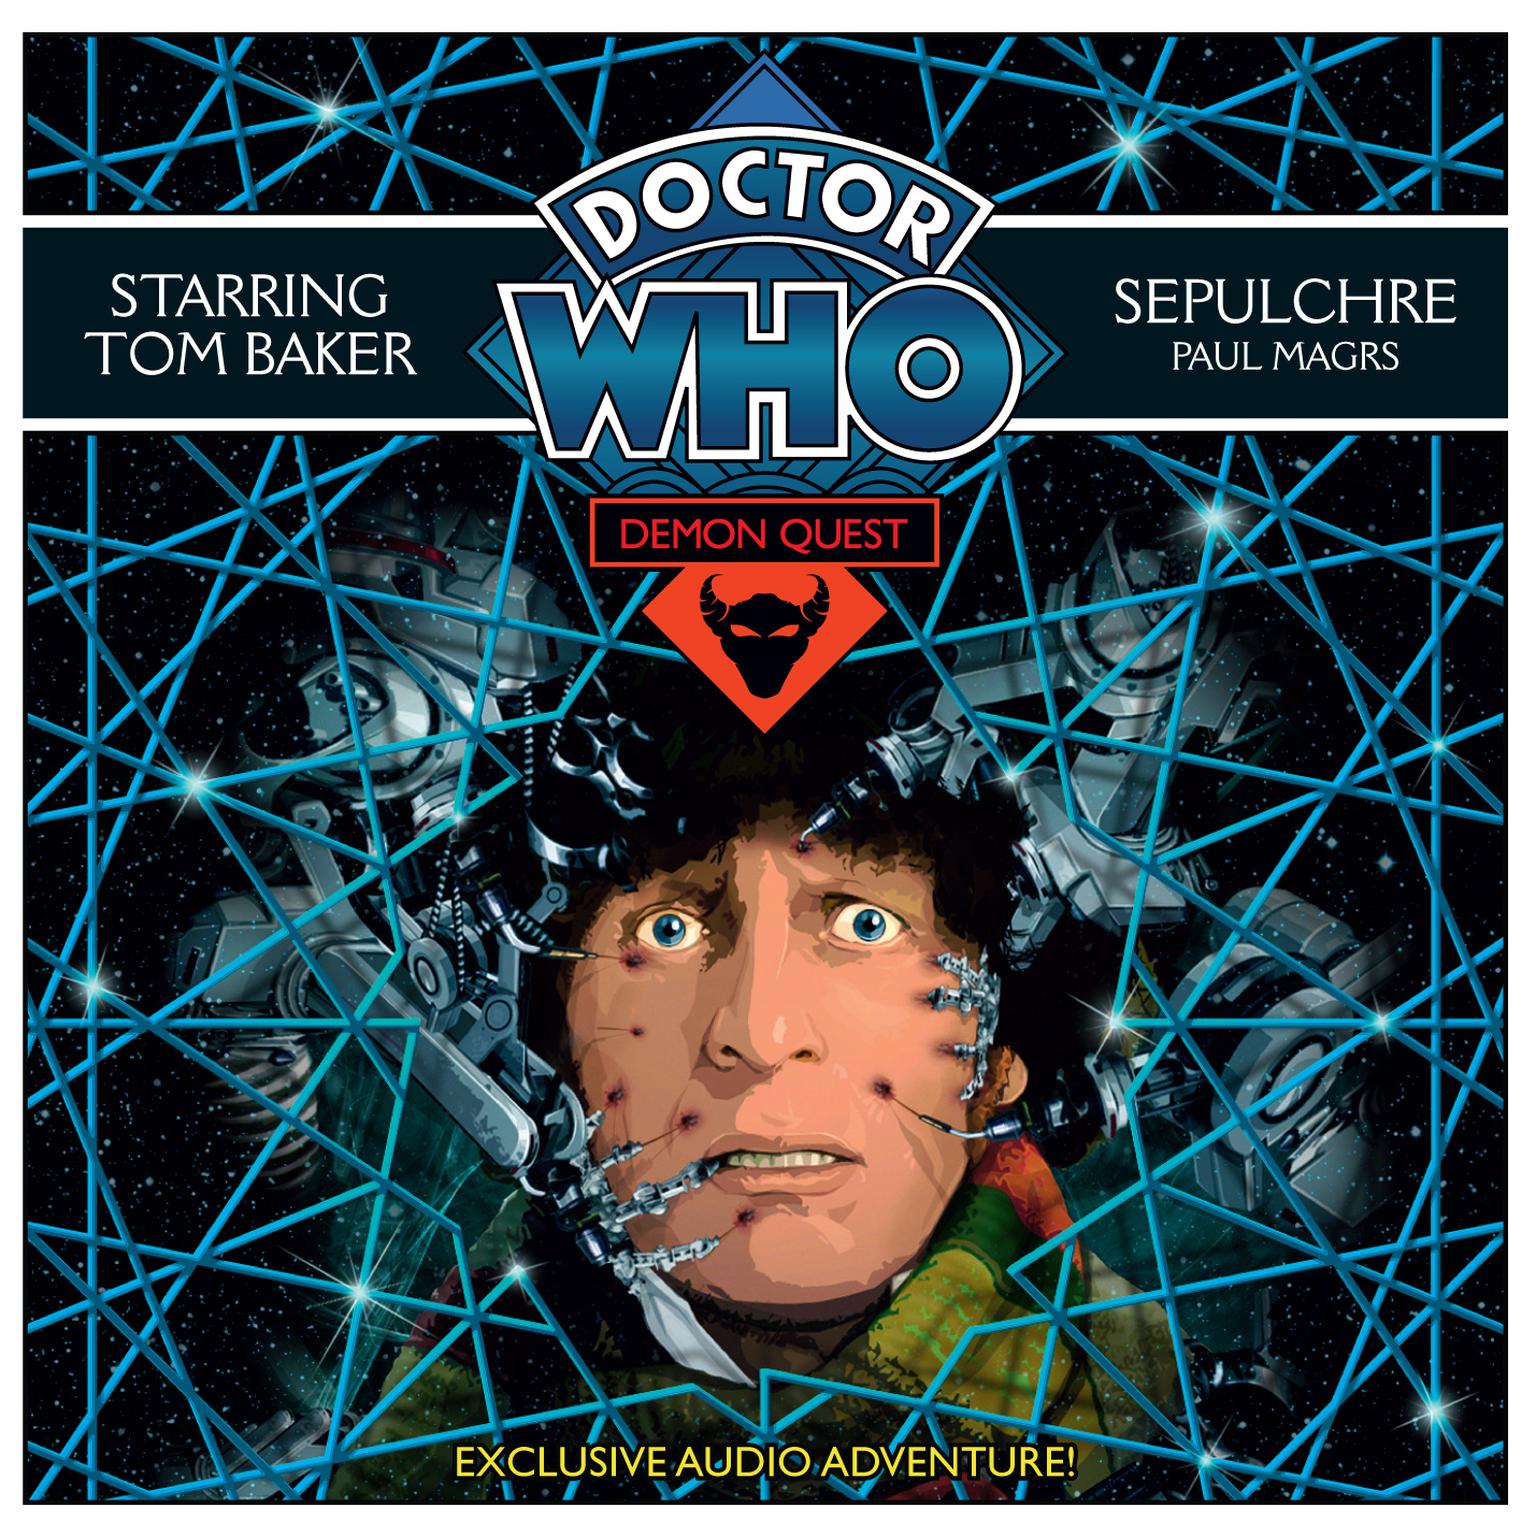 Doctor Who: Sepulchre Audiobook, by Paul Magrs